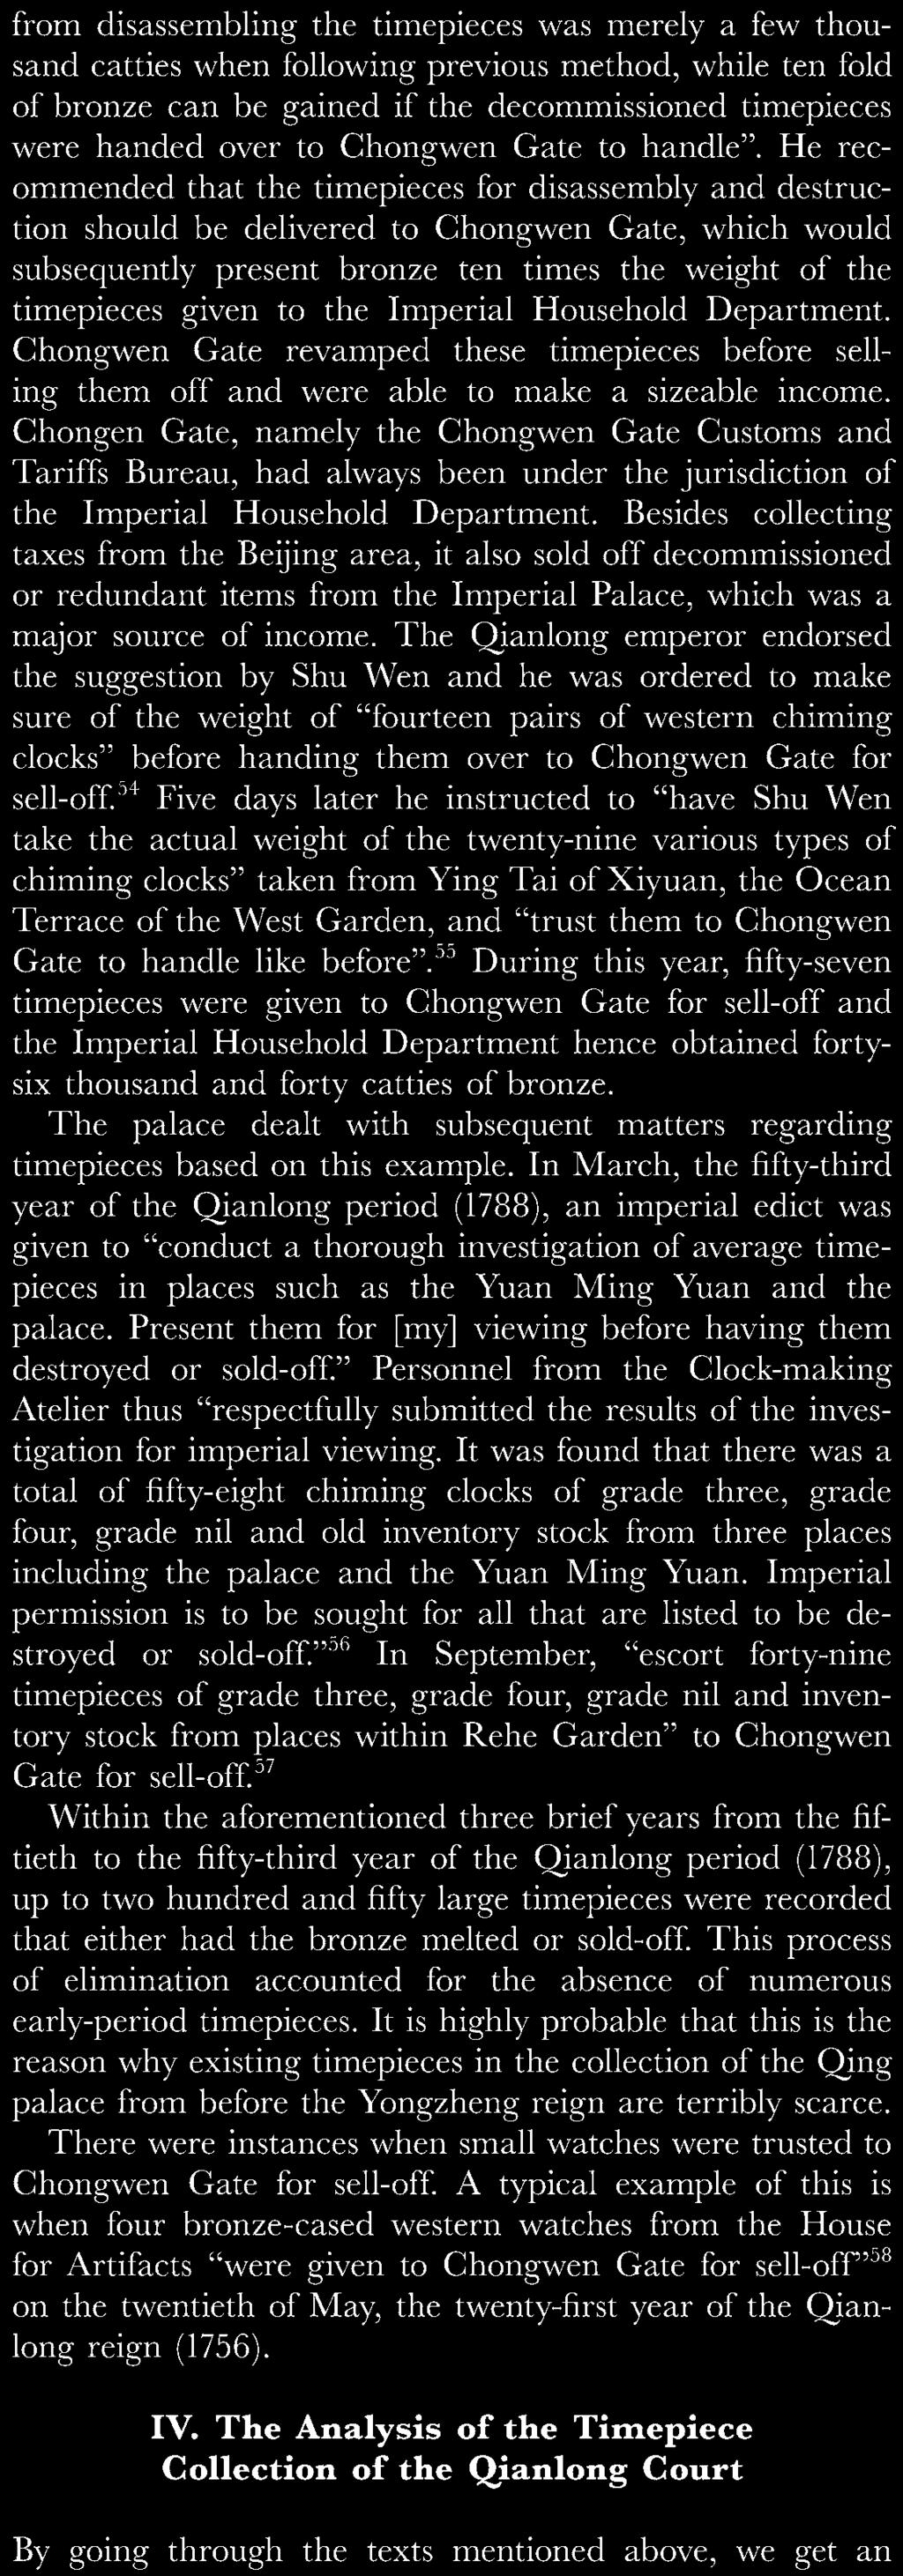 the late Qing dynasty in the palace.